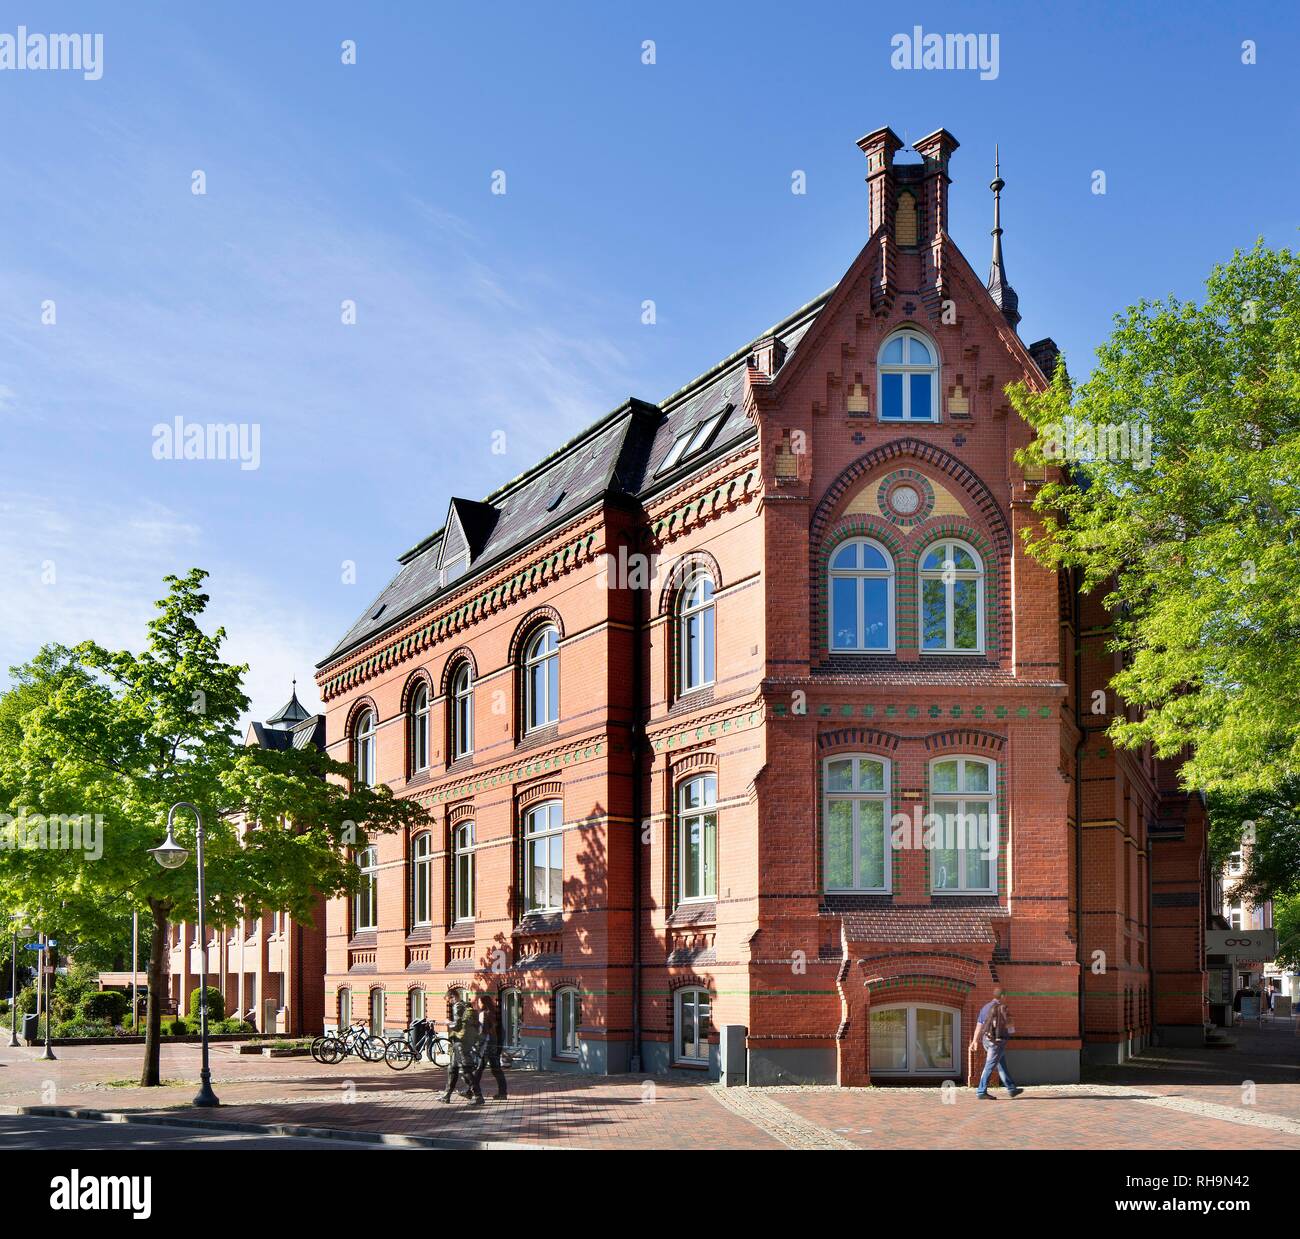 Historical Town Hall, Winsen an der Luhe, Lower Saxony, Germany Stock Photo